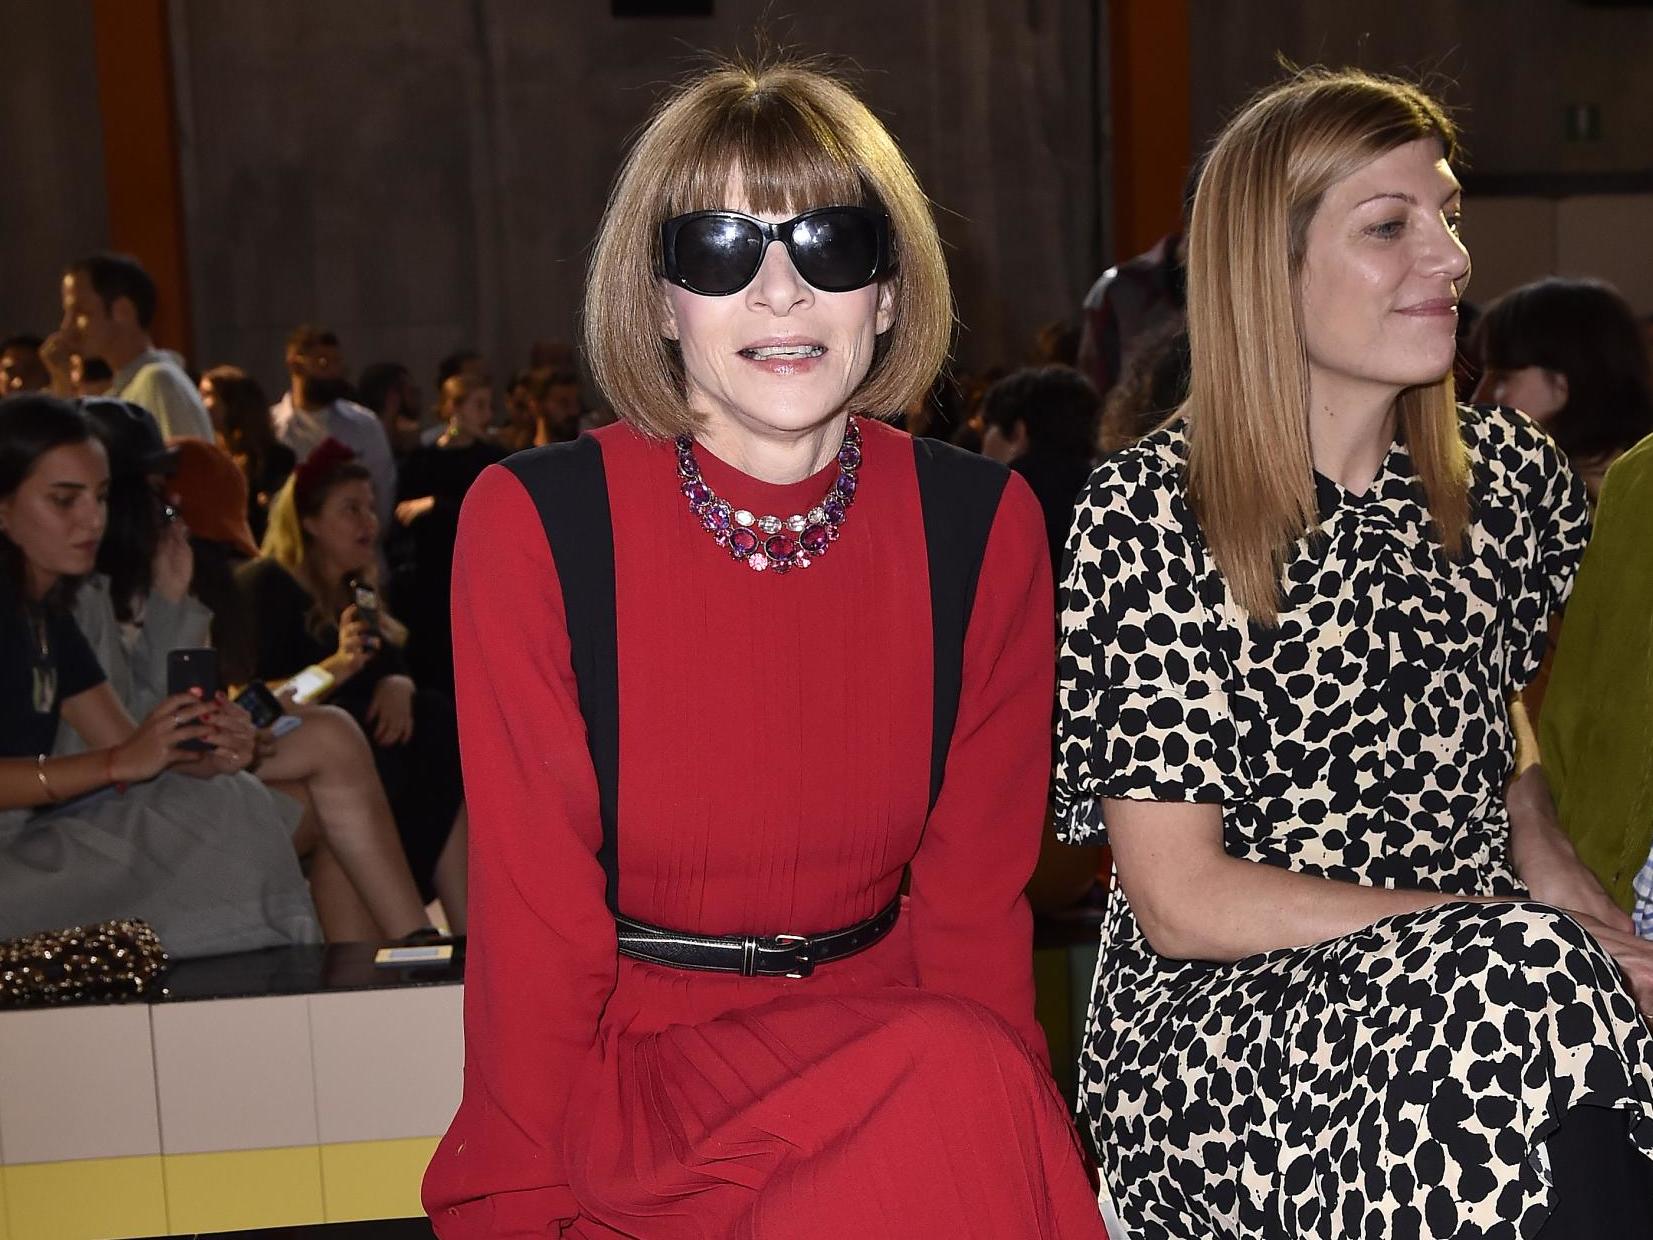 Vogue editor Anna Wintour reportedly self-isolated after returning from Italy